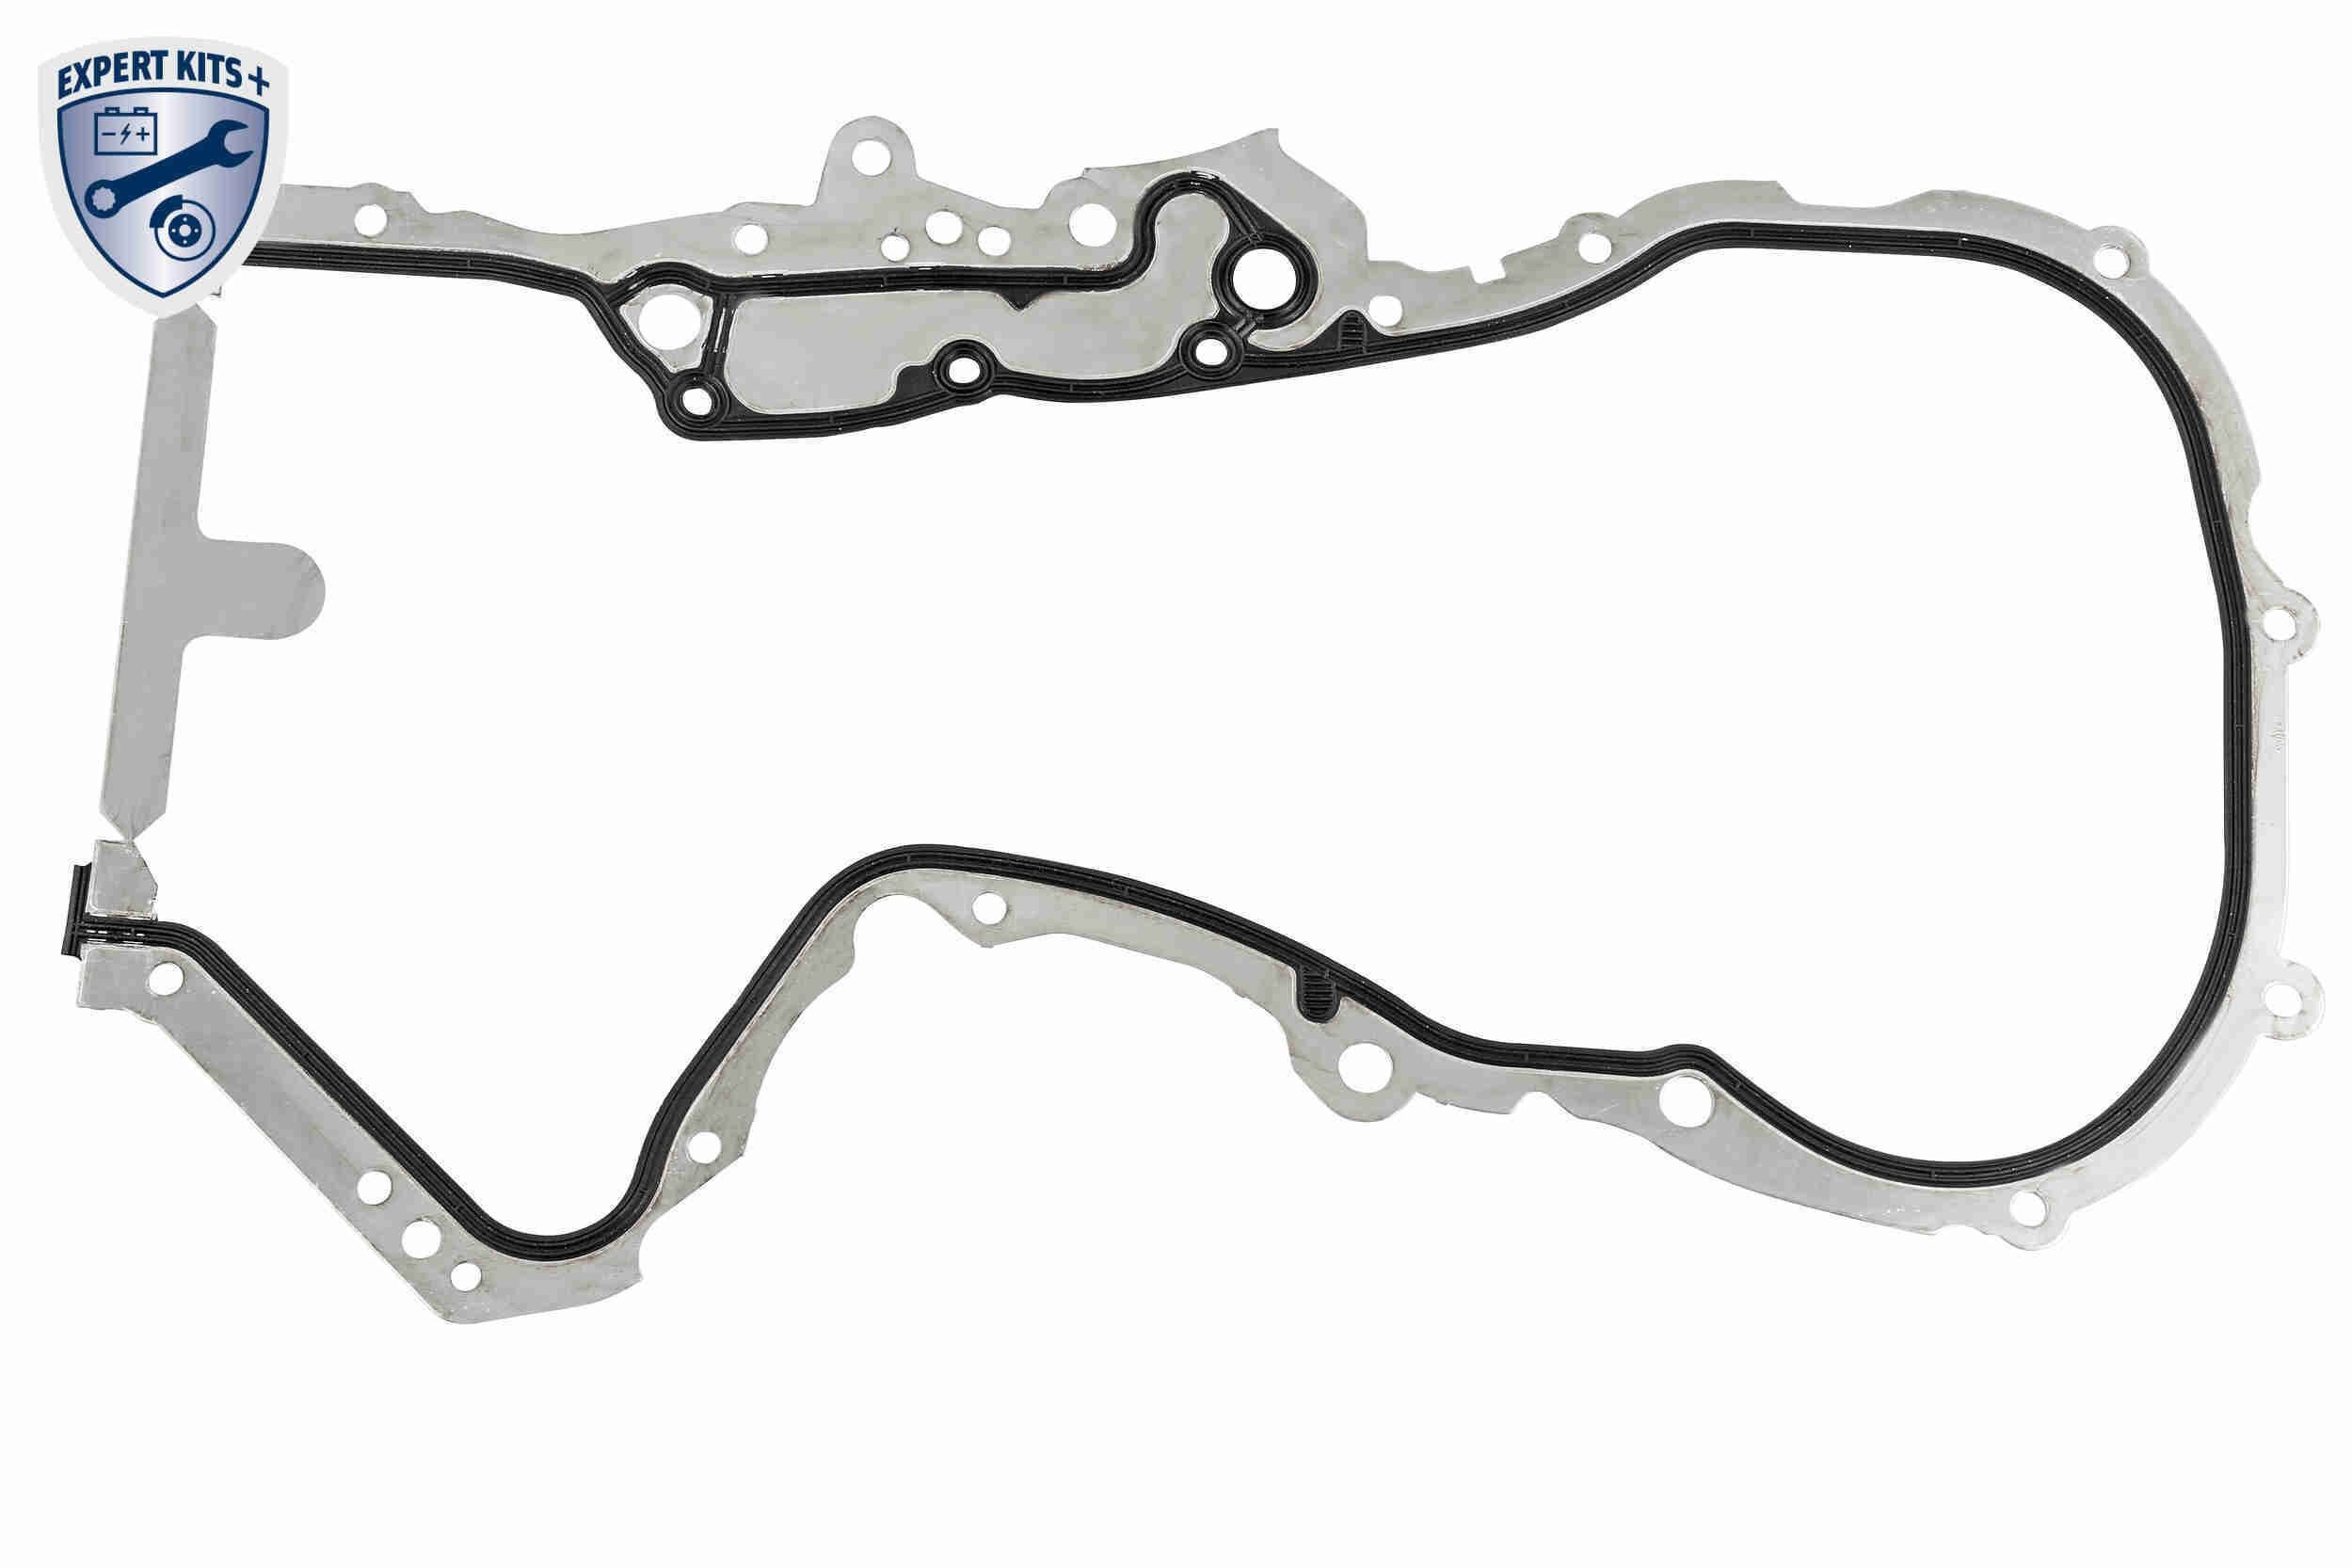 VAICO V10-10010-SP Cam chain kit with gears, with camshaft adjuster, with chain tensioner, with slide rails, with gaskets, with bolts/screws, for camshaft, Silent Chain, Closed chain